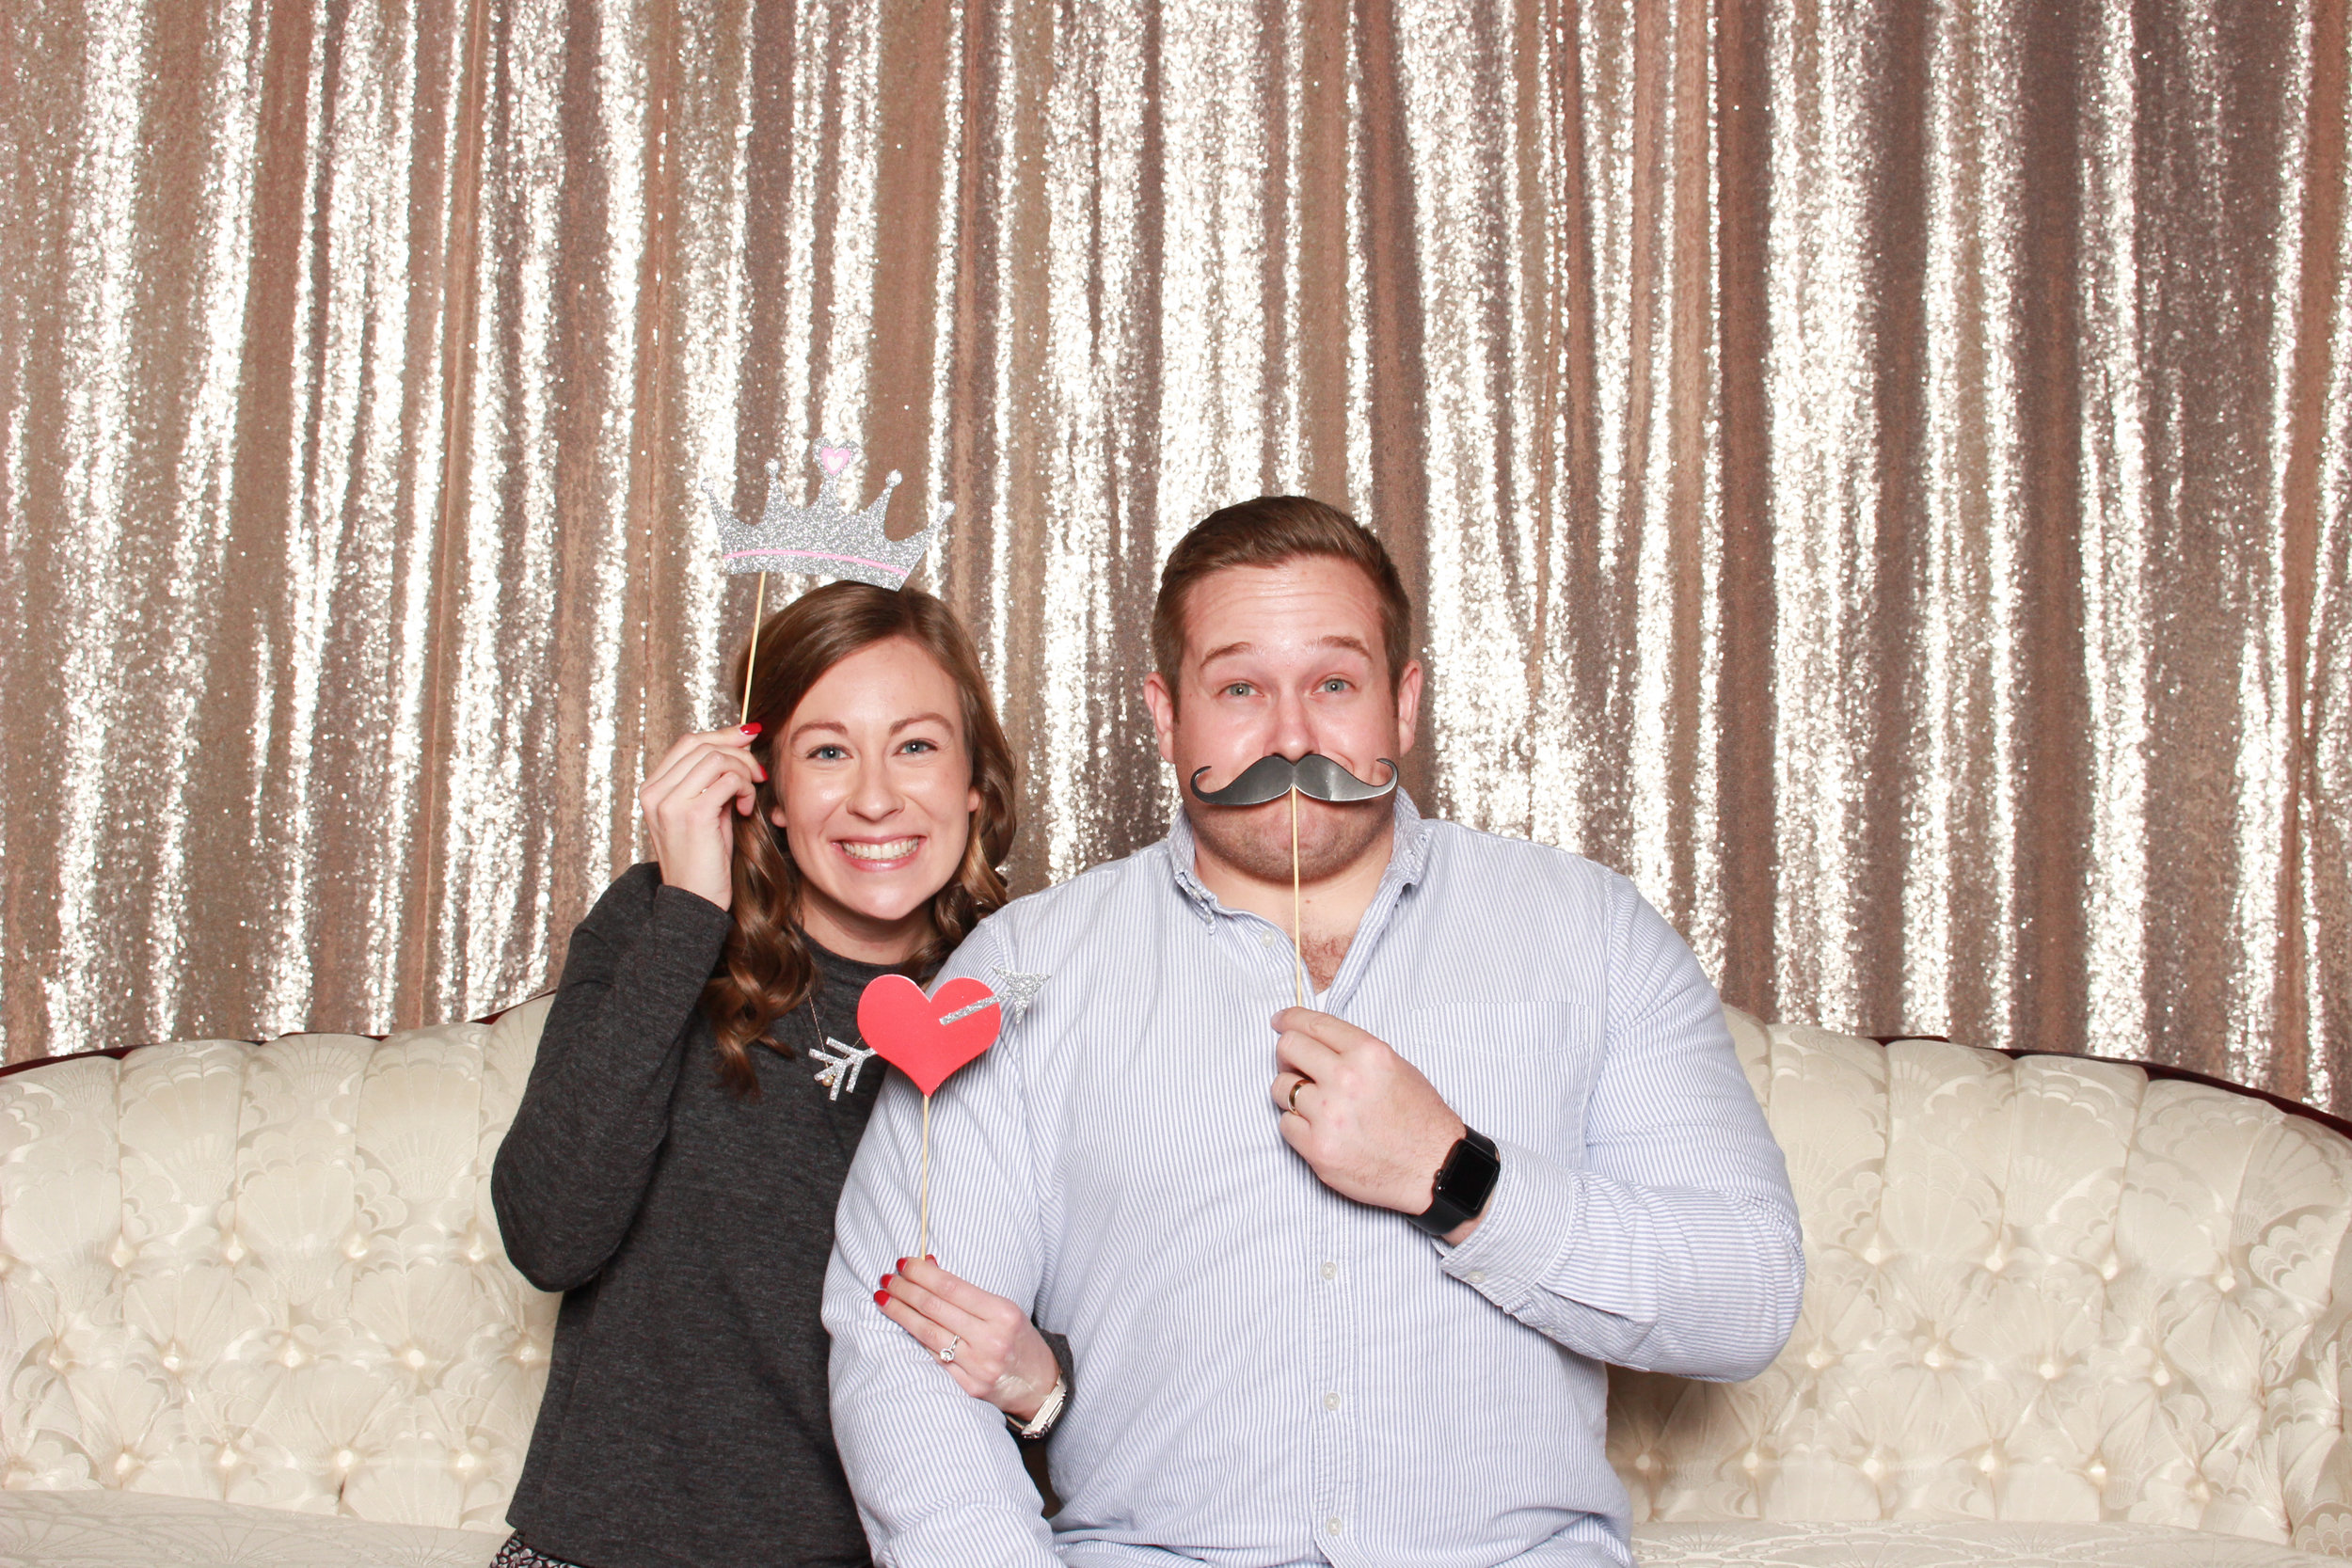 austin photo booth rental oh happy day booth49.jpg